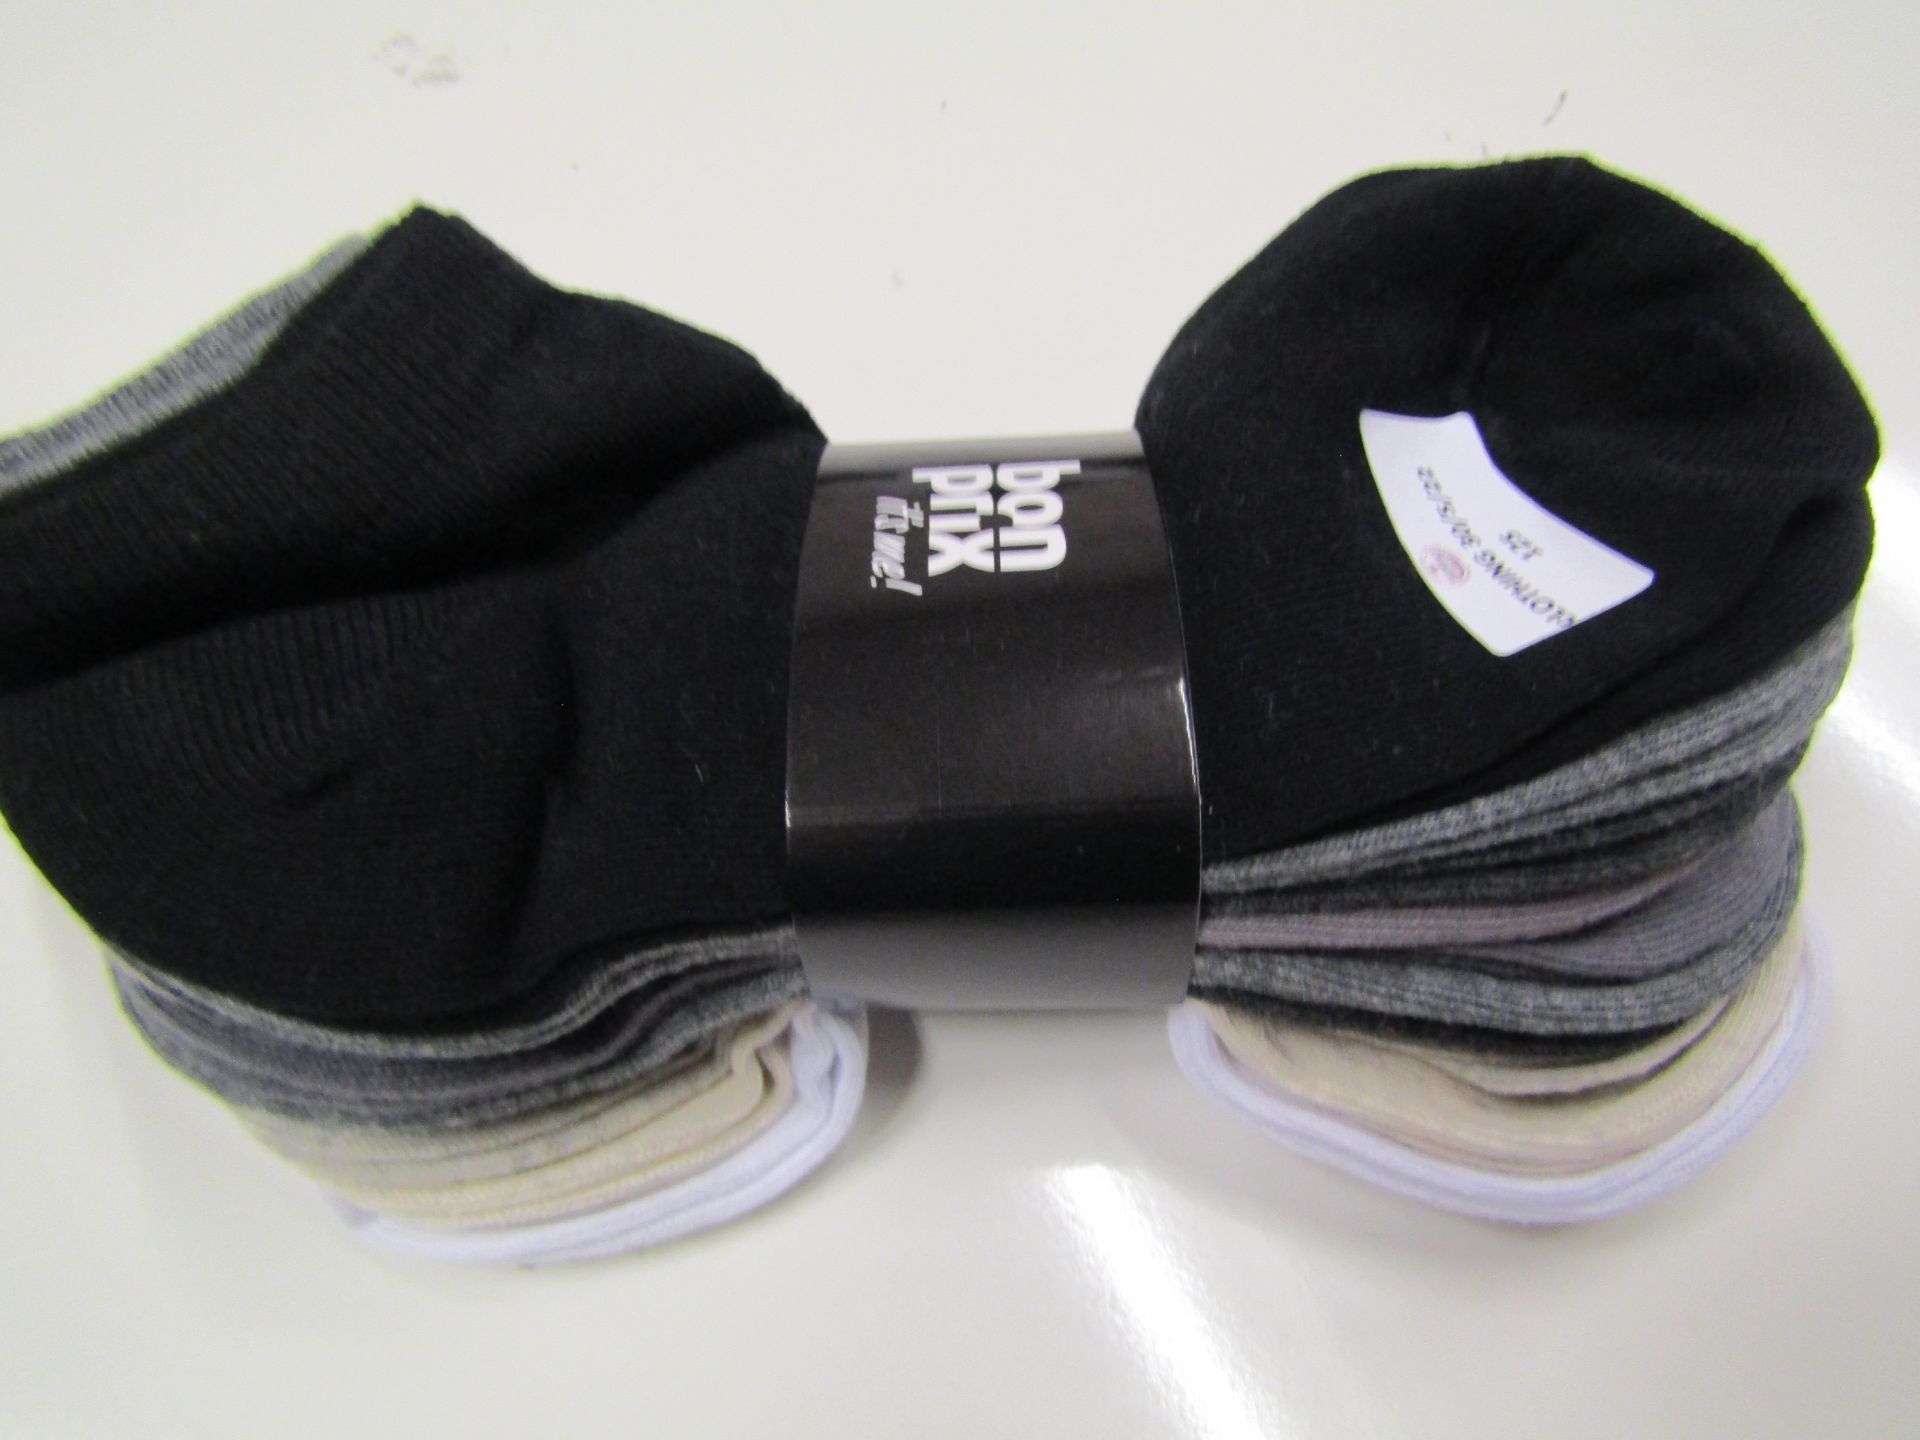 10 X Pairs of Trainer Socks Various Colours Size 5.5 -8 New & Packaged